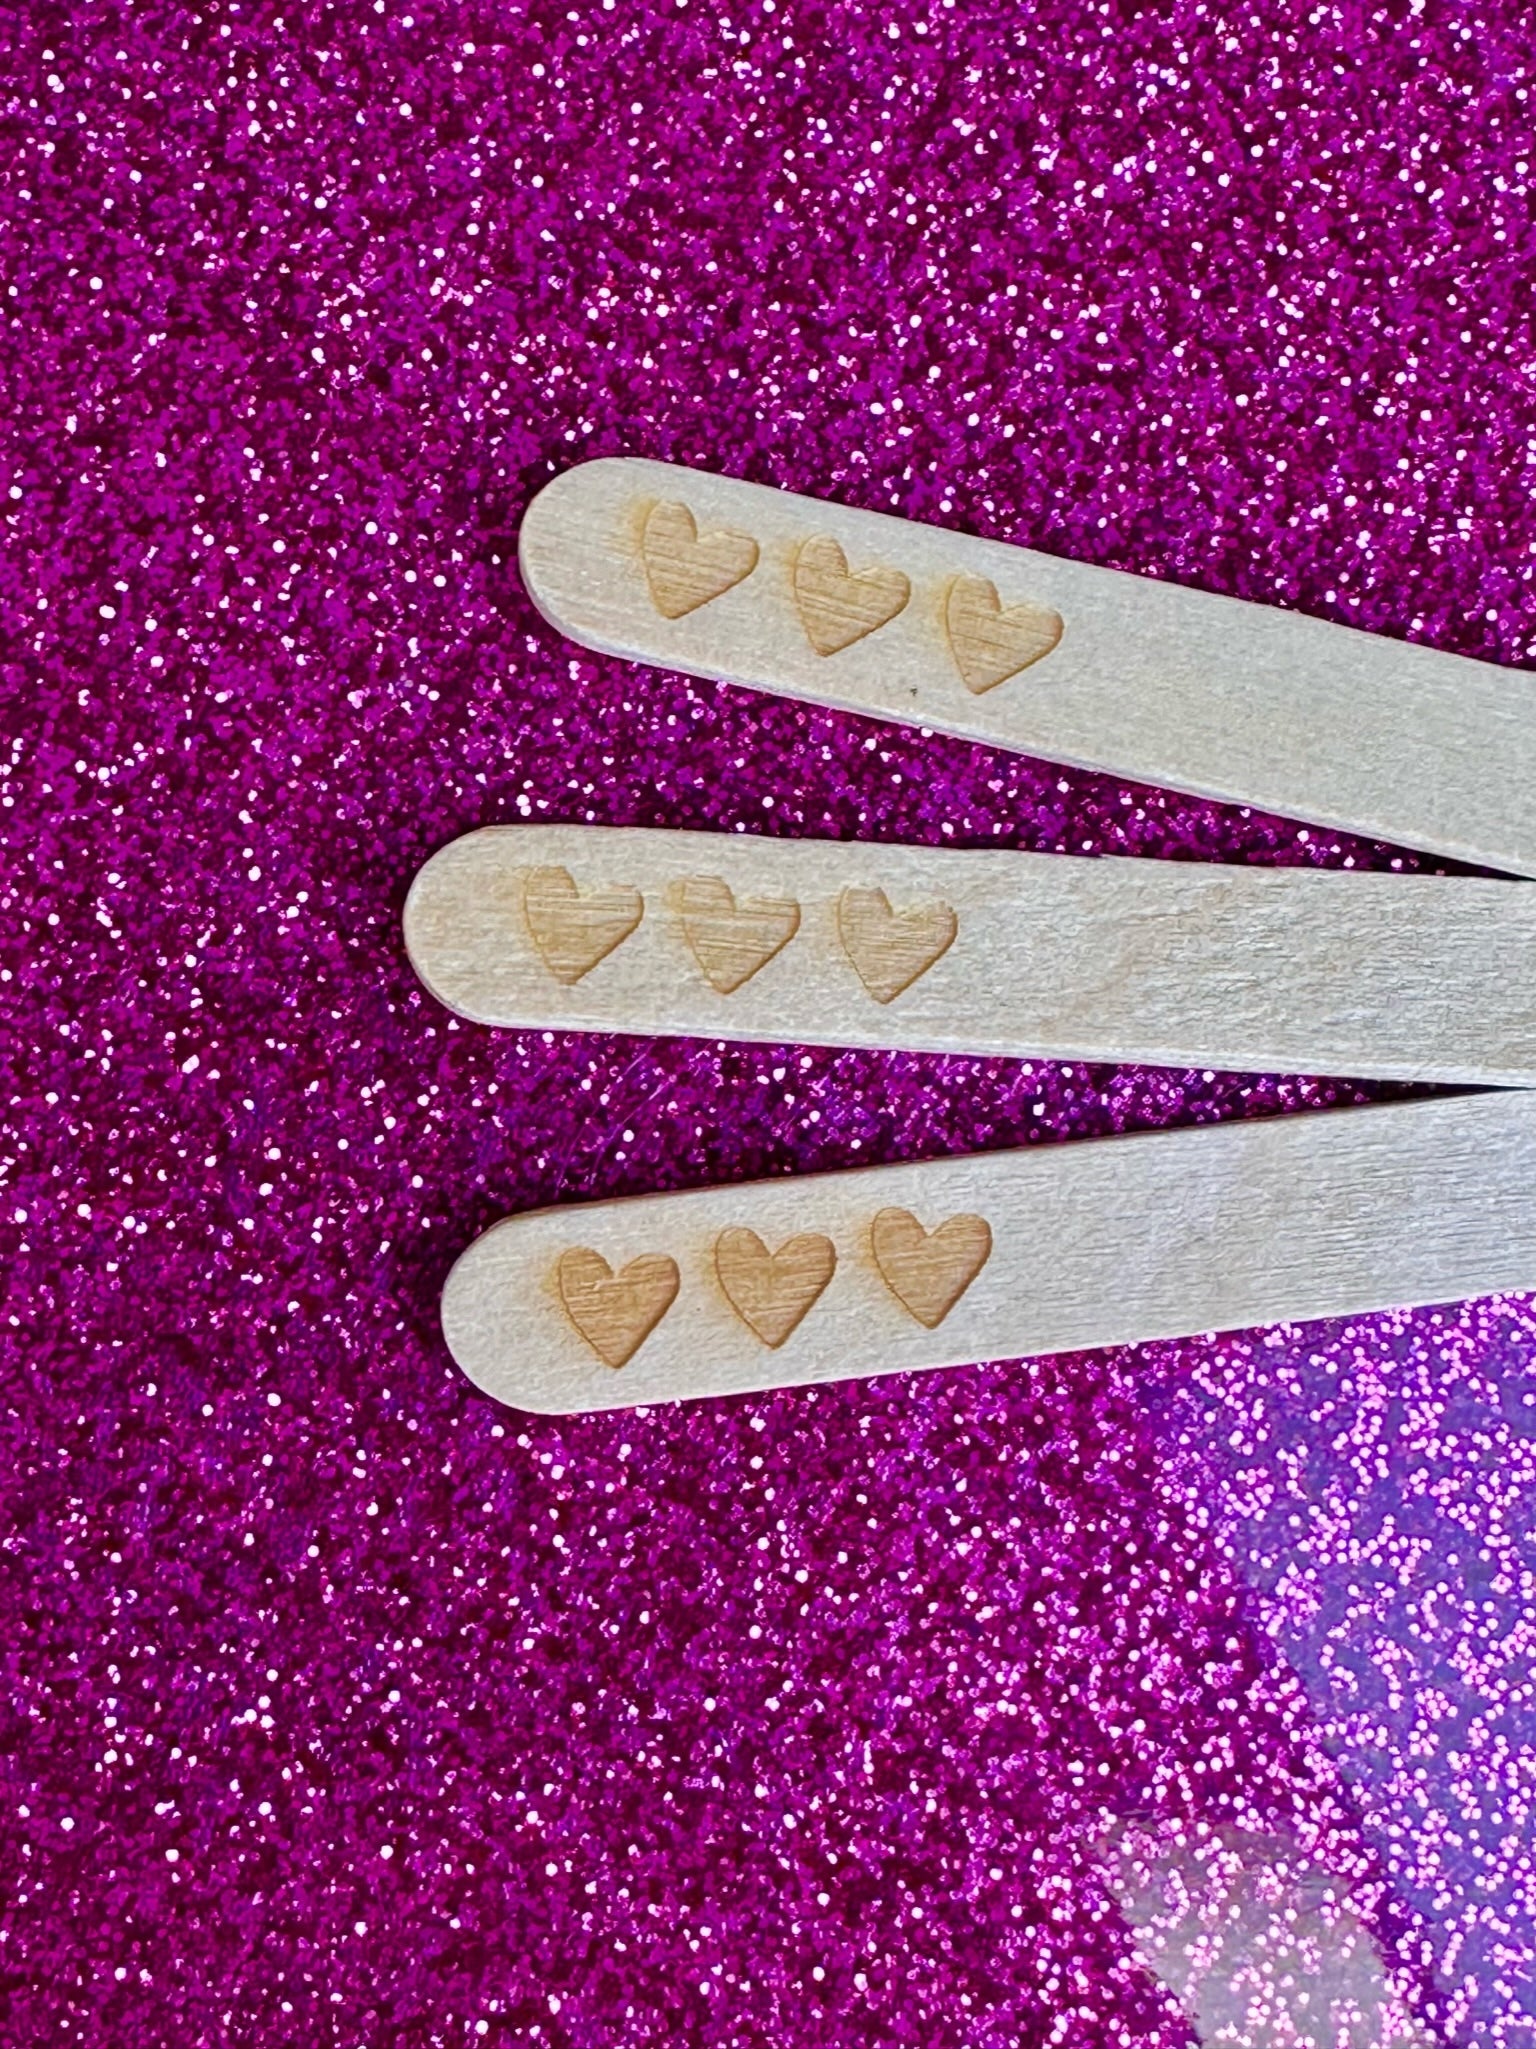 Engraved Valentine's Day Cakesicle/Popsicle Sticks (set of 12)